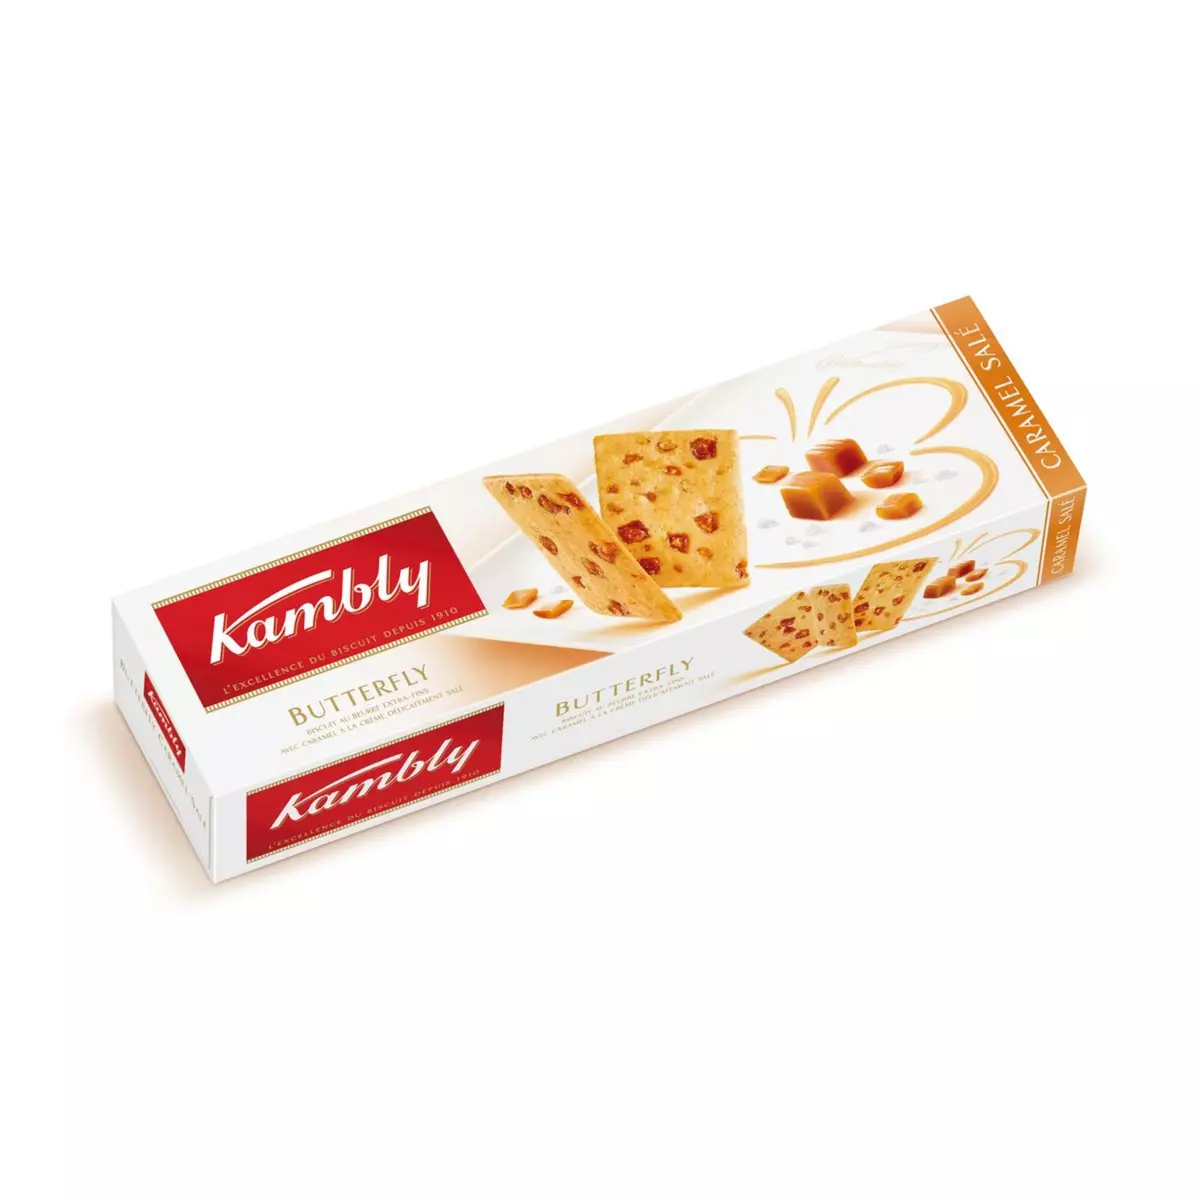 KAMBLY Butterfly biscuits extra fin au beurre avec caramel 100g